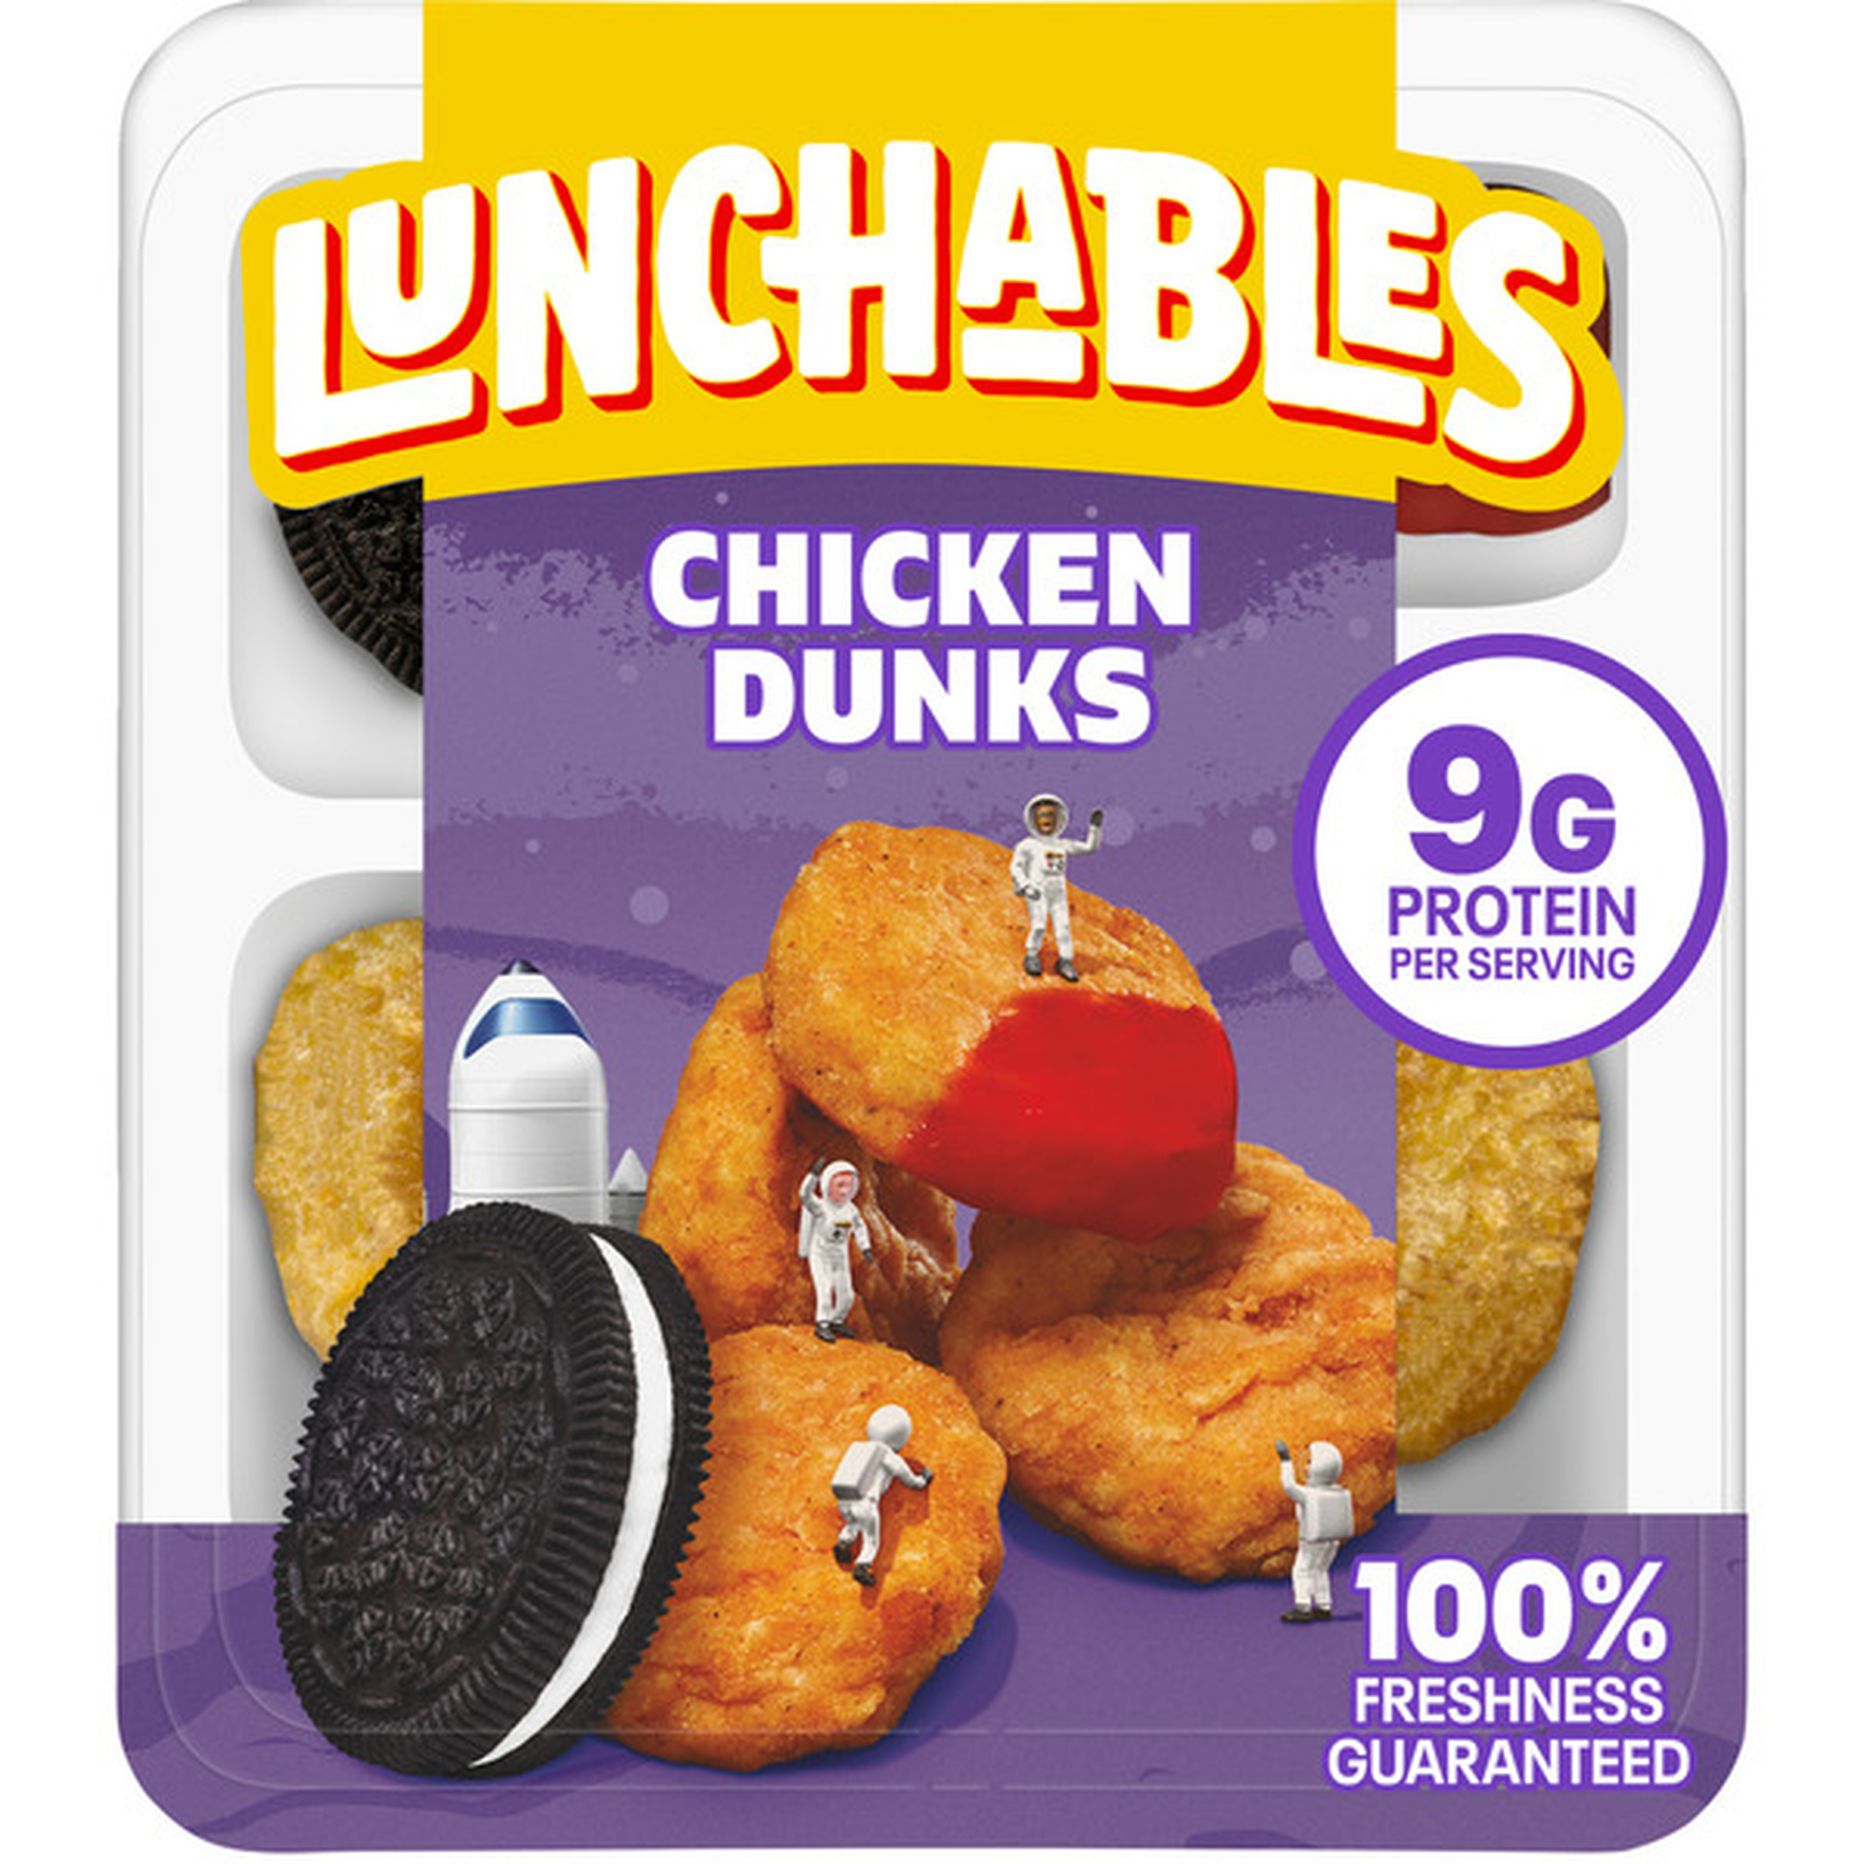 Lunchables Chicken Dunks with Chocolate Sandwich Cookies (4 oz